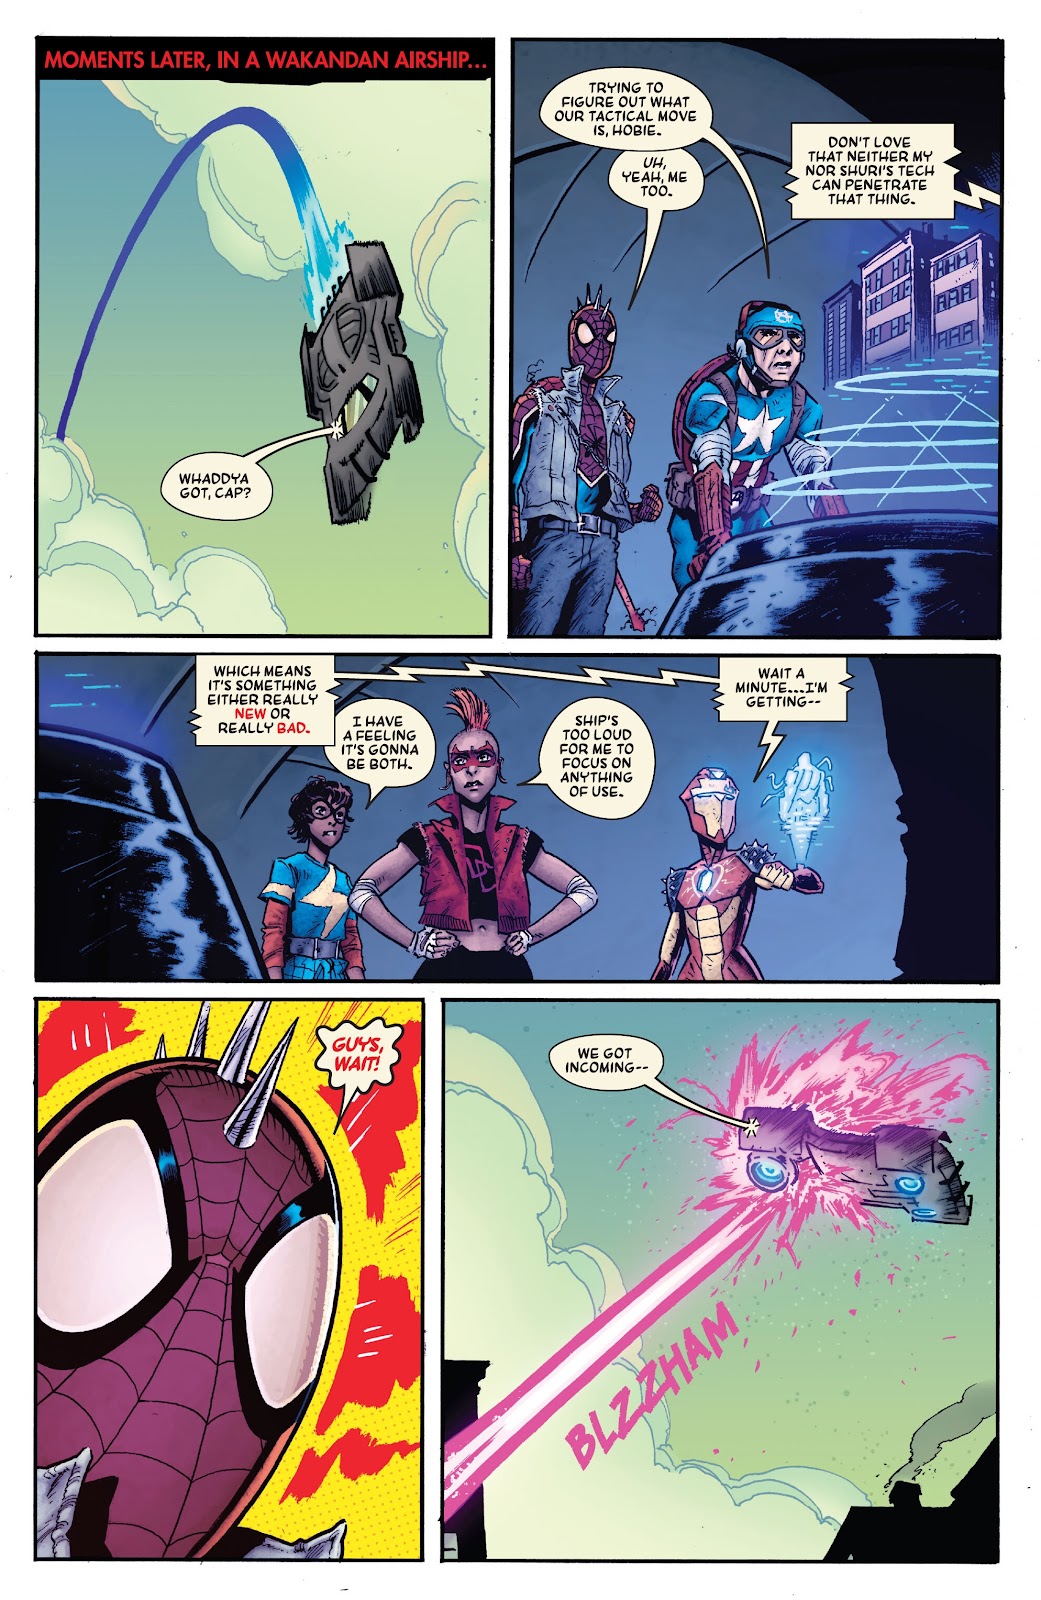 Spider-Punk: Arms Race issue 1 - Page 18